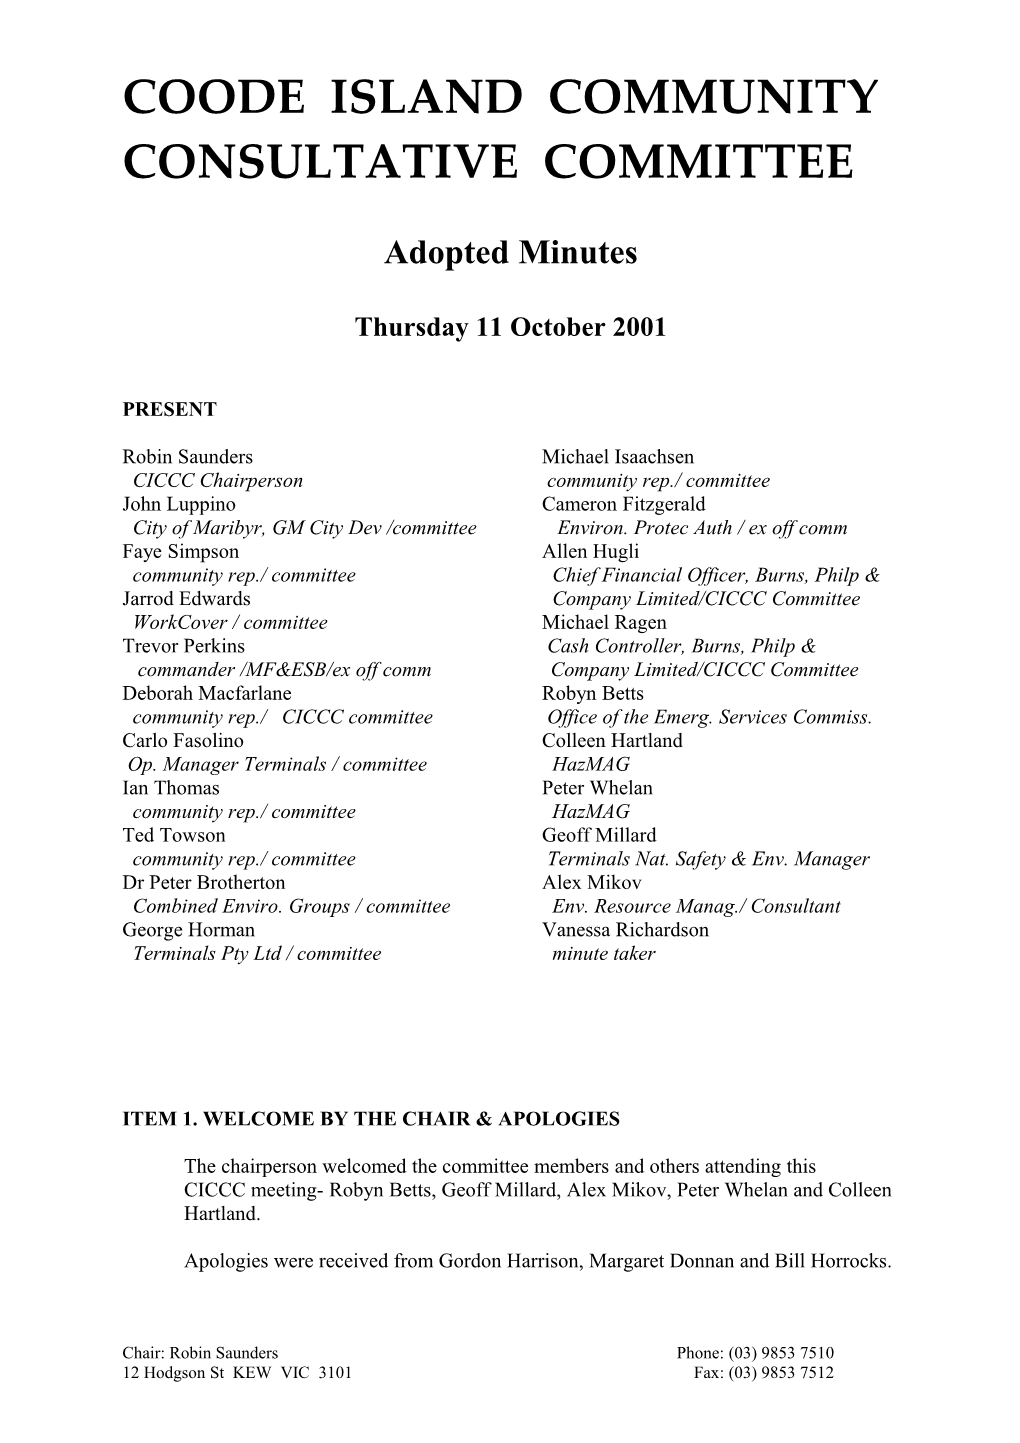 Adopted Minutes